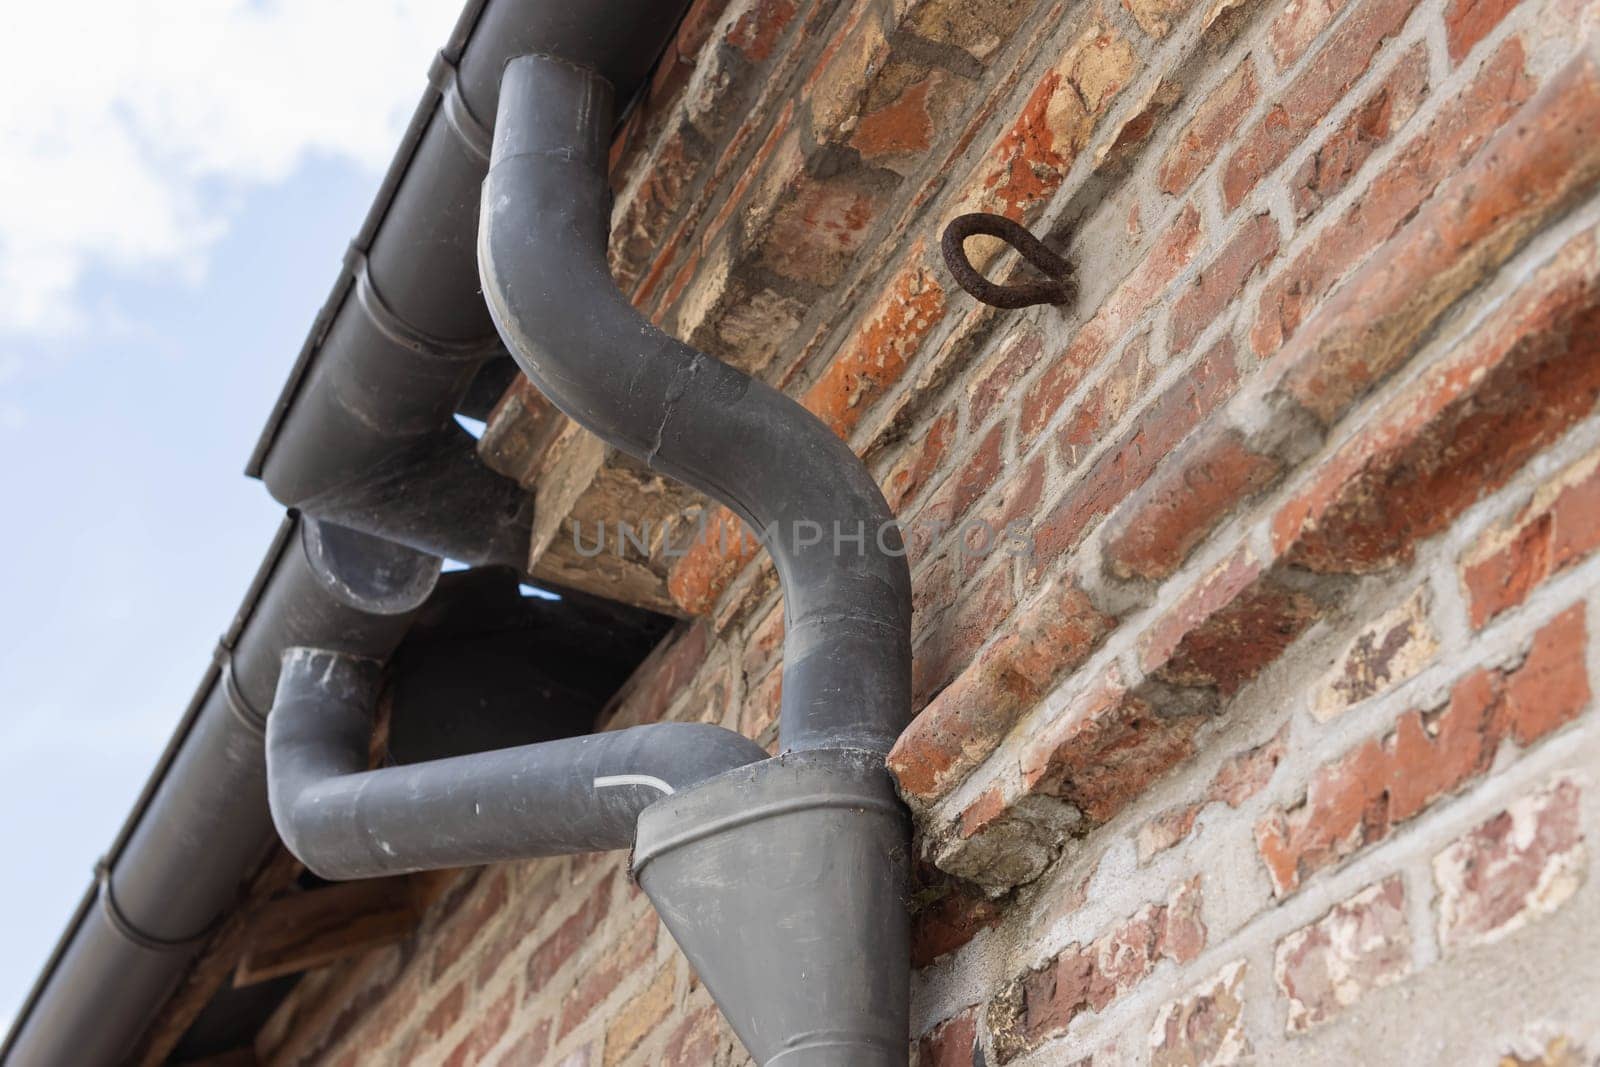 Vintage gutter, downspout, downspout is a pipe to carry rainwater out of the gutter. For the accumulation and storage of rainwater for reuse on site. High quality photo